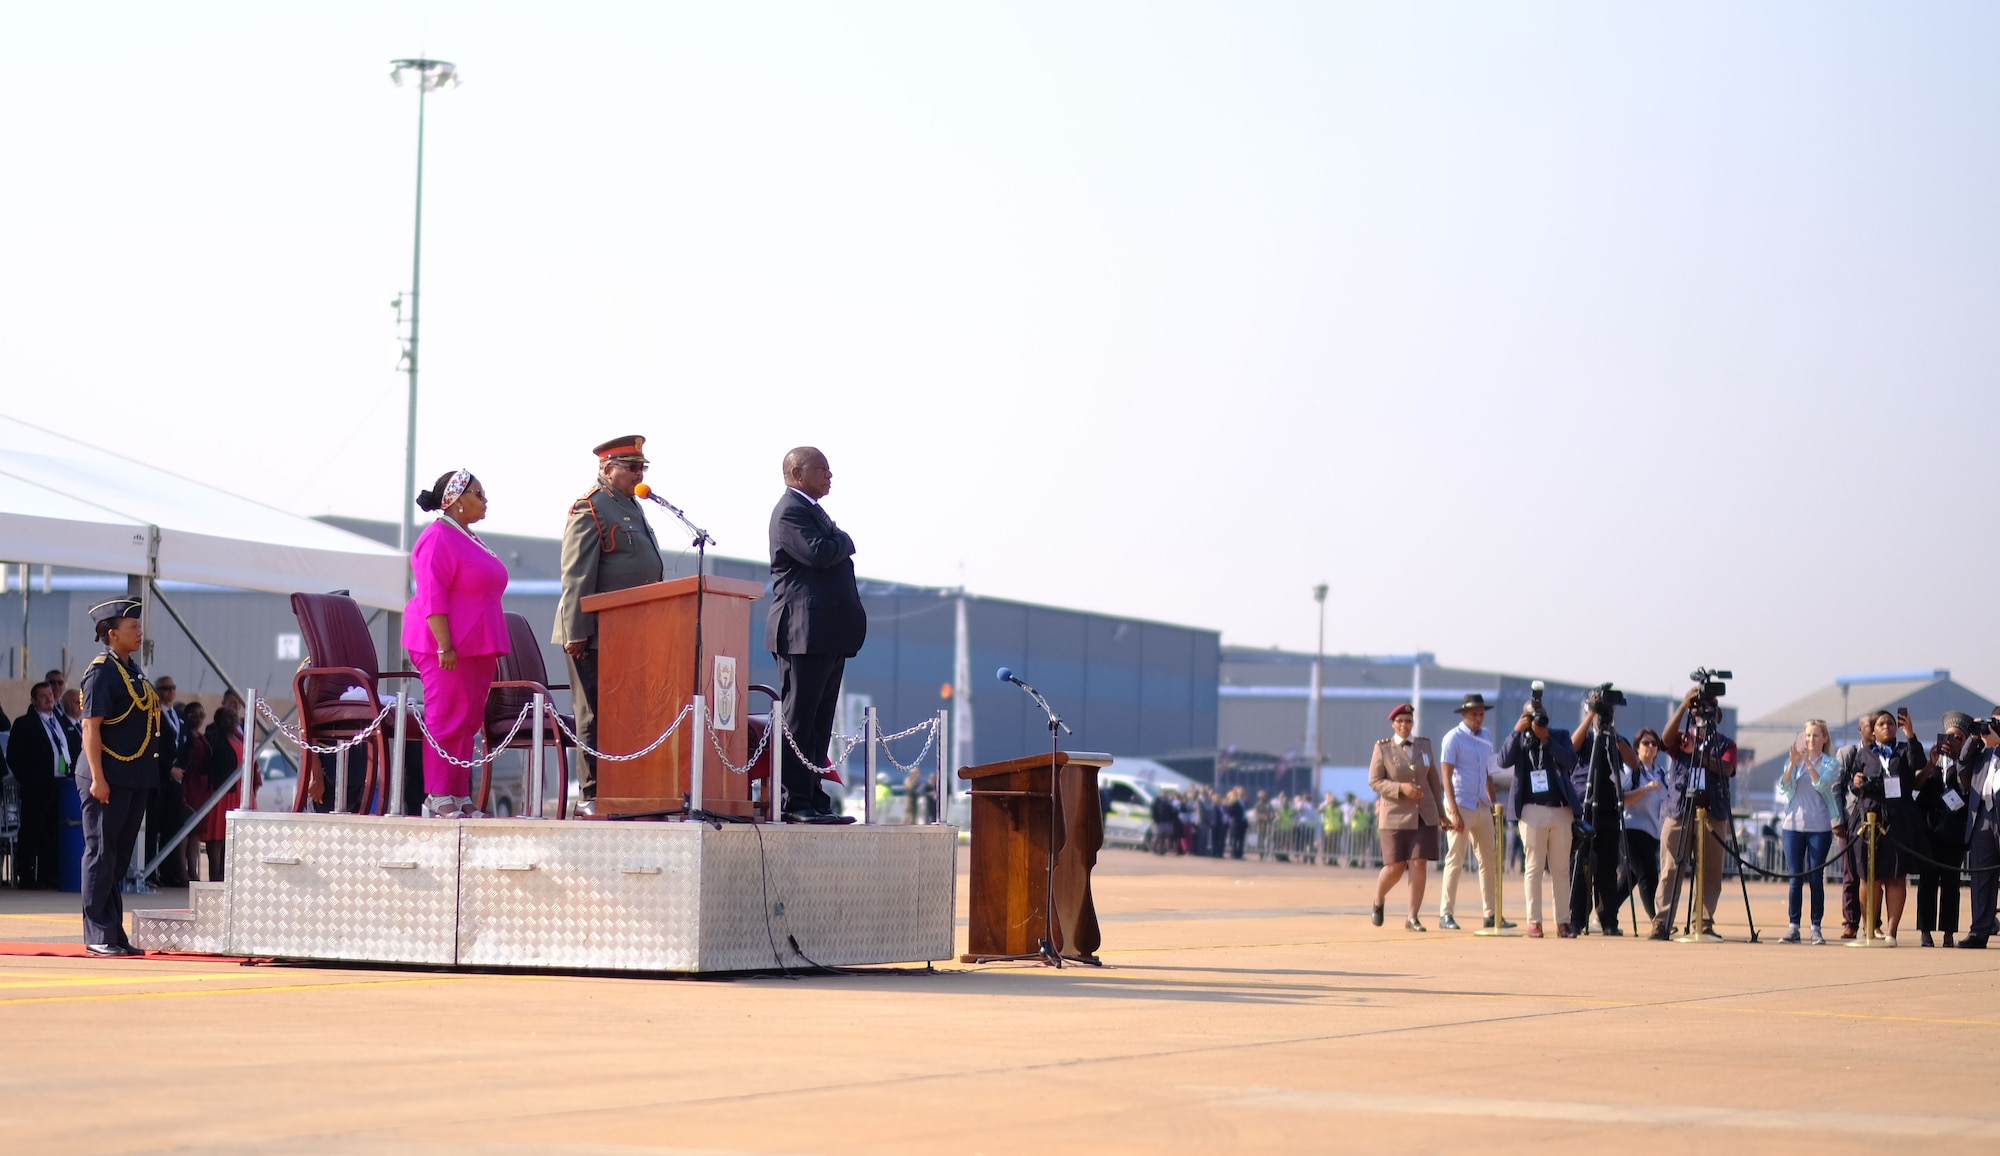 The President of the Republic of South Africa, Cyril Ramaphosa, addresses the crowd of attendees during the African Aerospace and Defense Exhibition 18 opening ceremony, September 19, 2018, Waterkloof Air Force Base, South Africa. This tradeshow will increase our understanding of each other’s capabilities and proficiencies, enhancing our ability to operate together. (US Army PhotoStaff Sgt. Jeffery Sandstrum)